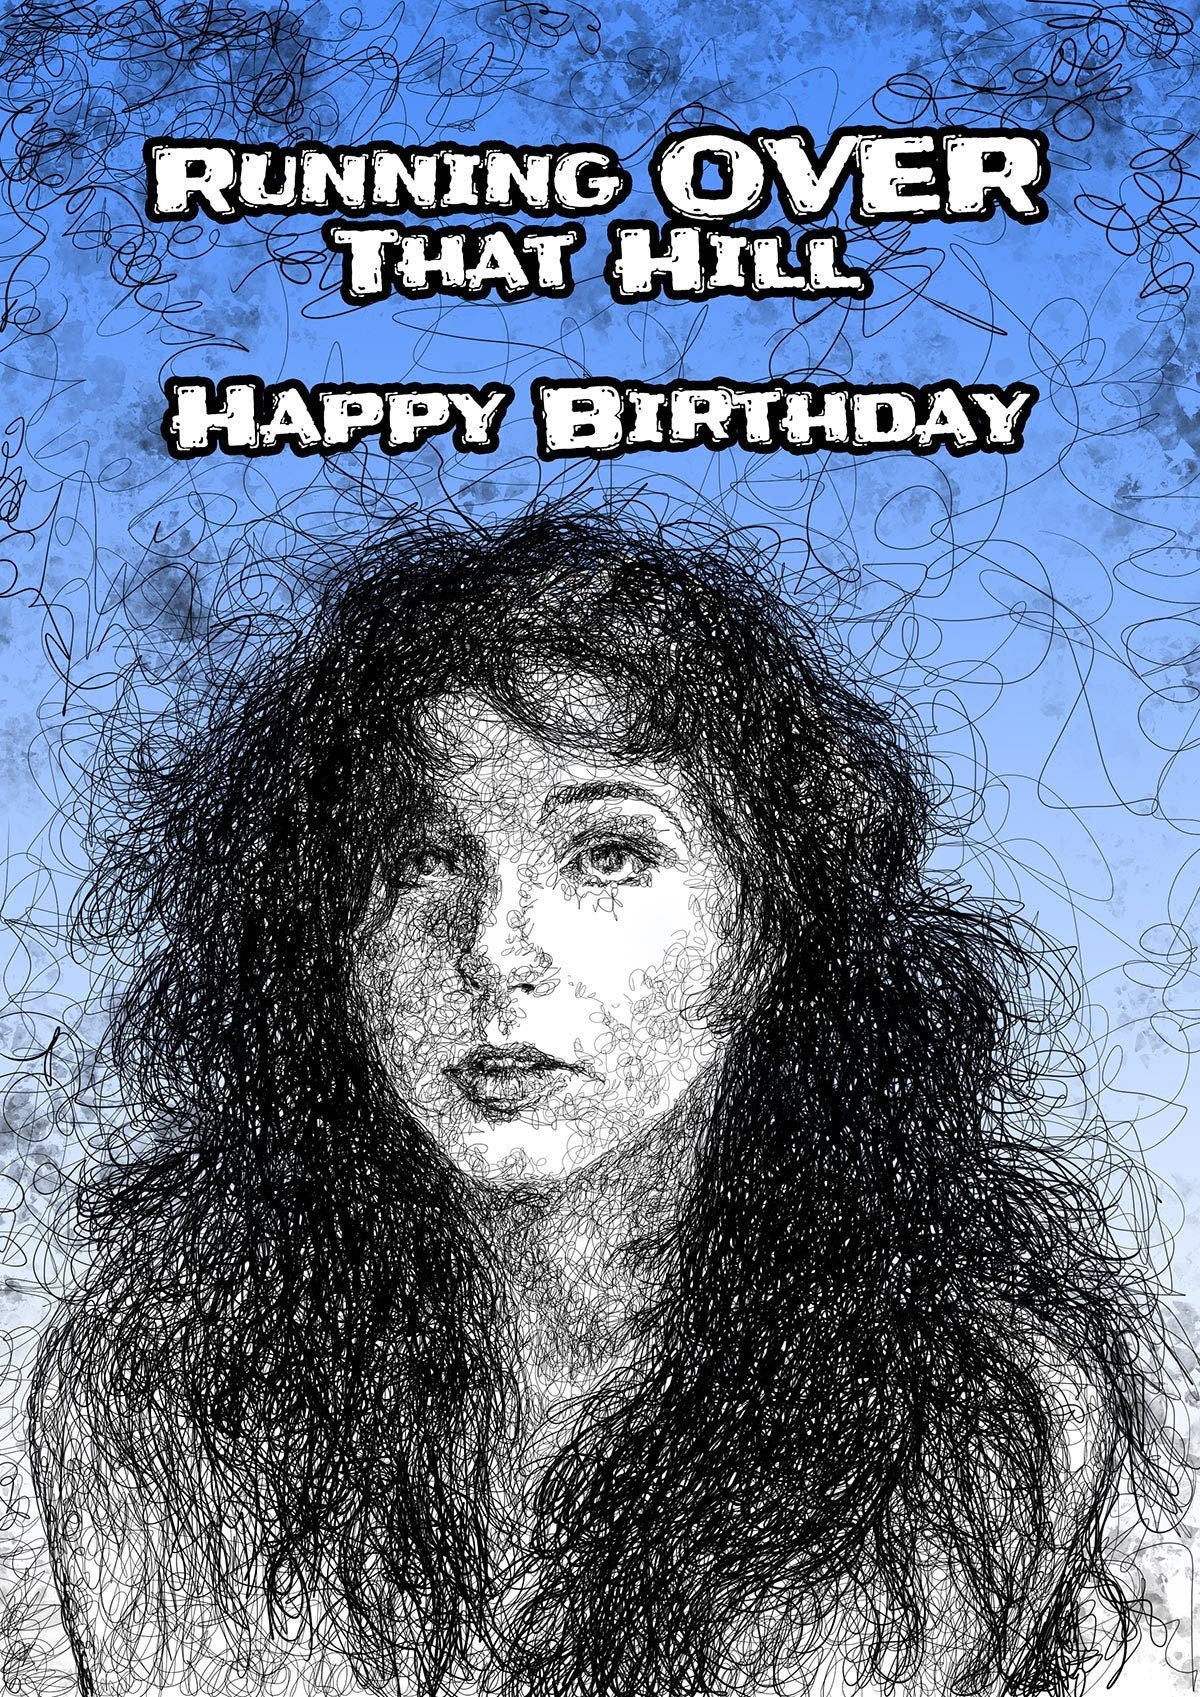 Kate Bush birthday card, greeting card for new wave music fans, music birthday gift, Running up that hill, over the hill, 80s music card